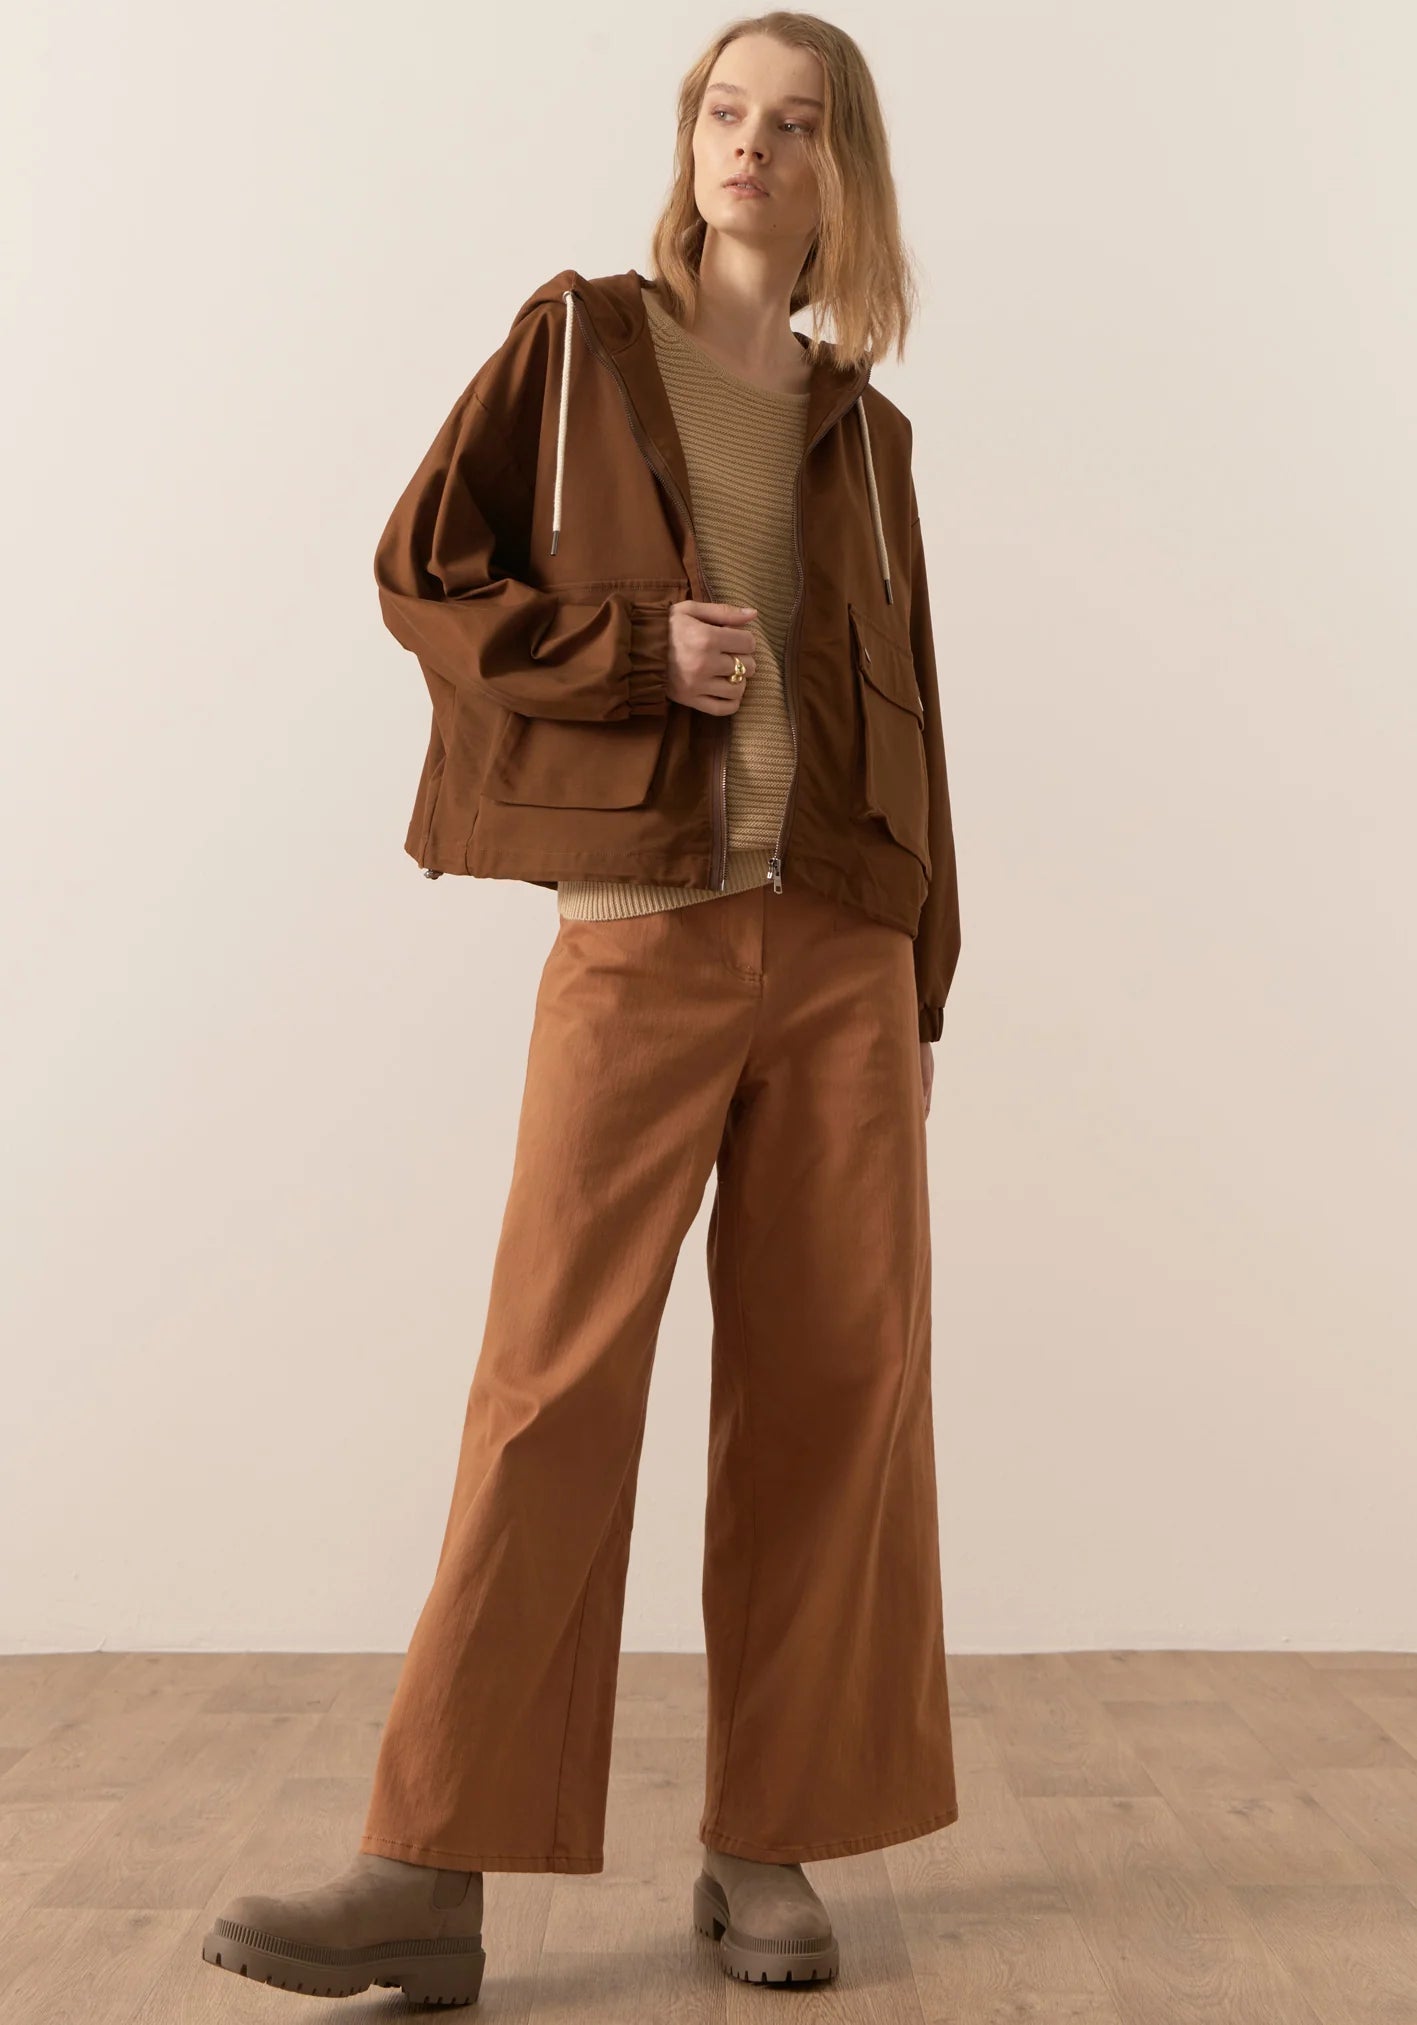 POL Forster Outdoor Jacket in Toffee